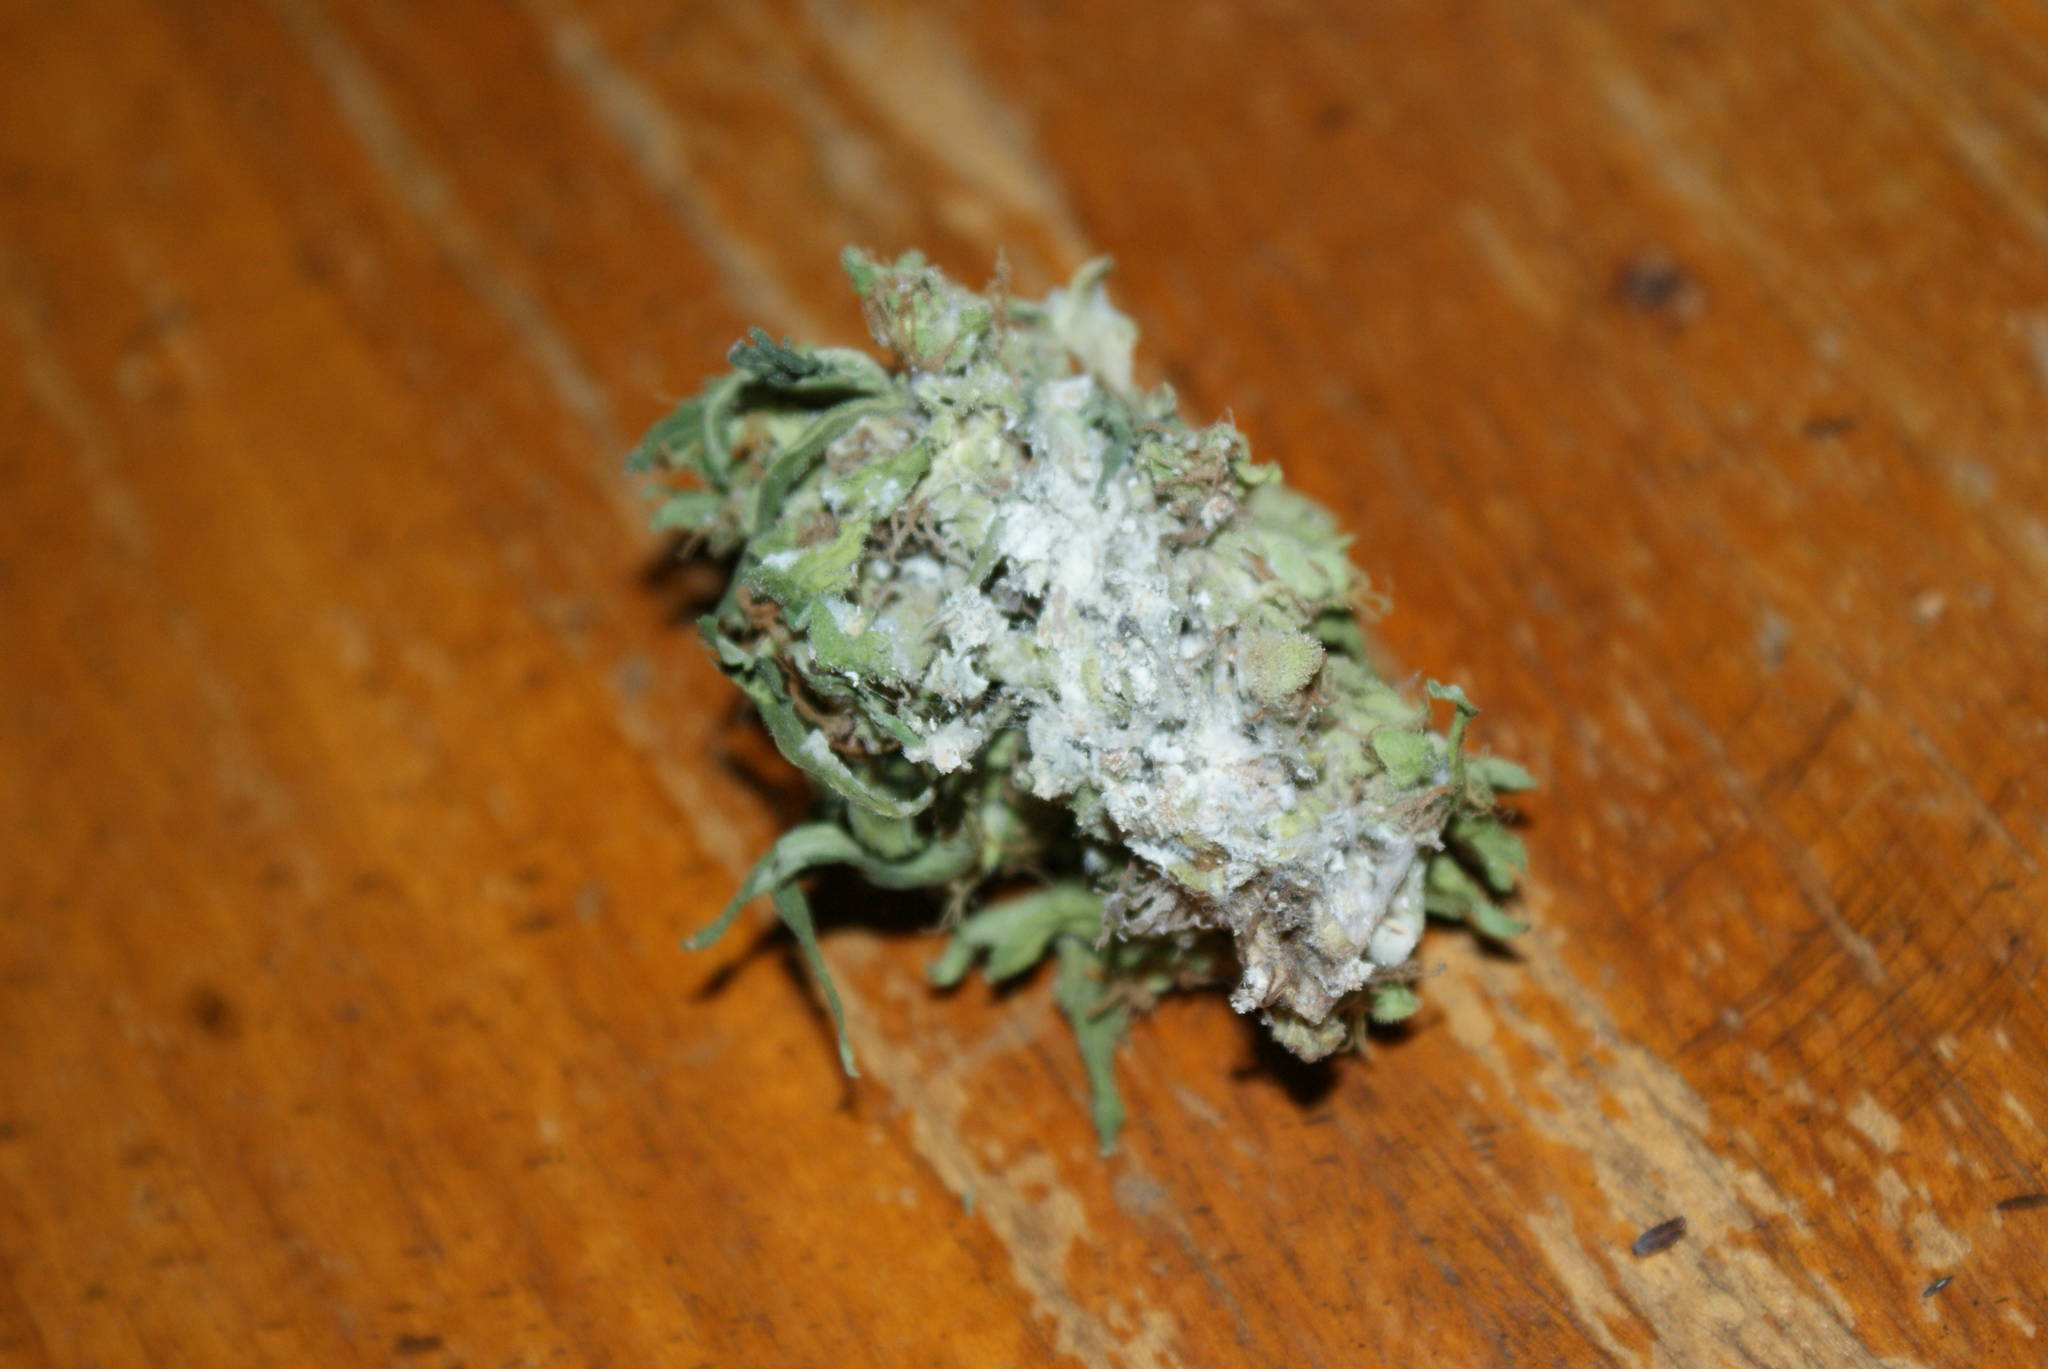 Is this mold or mealybug stuff?? - Cannabis Cultivation - Growery ...